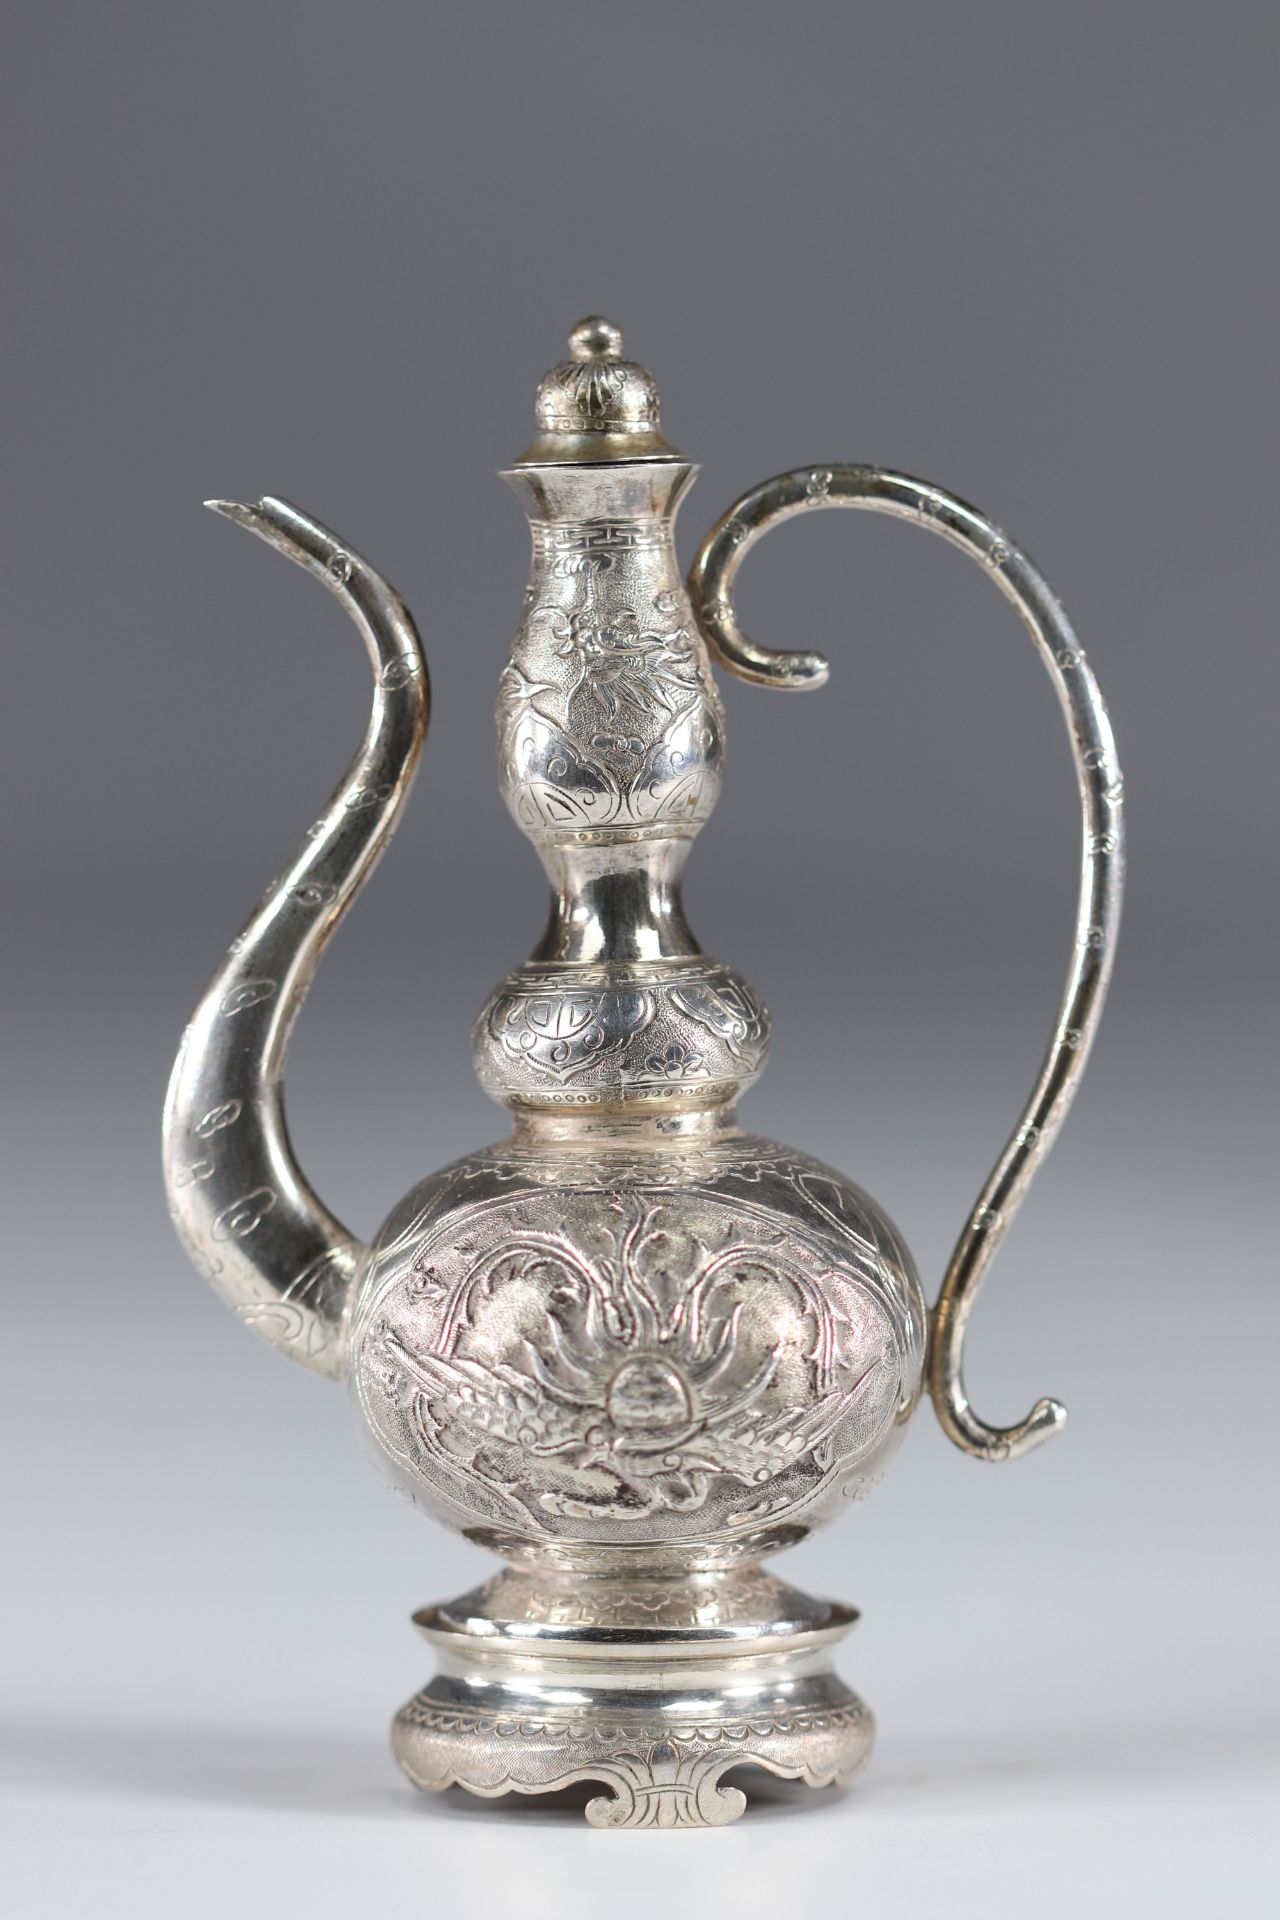 China set of silver objects teapot and pots - Image 3 of 12